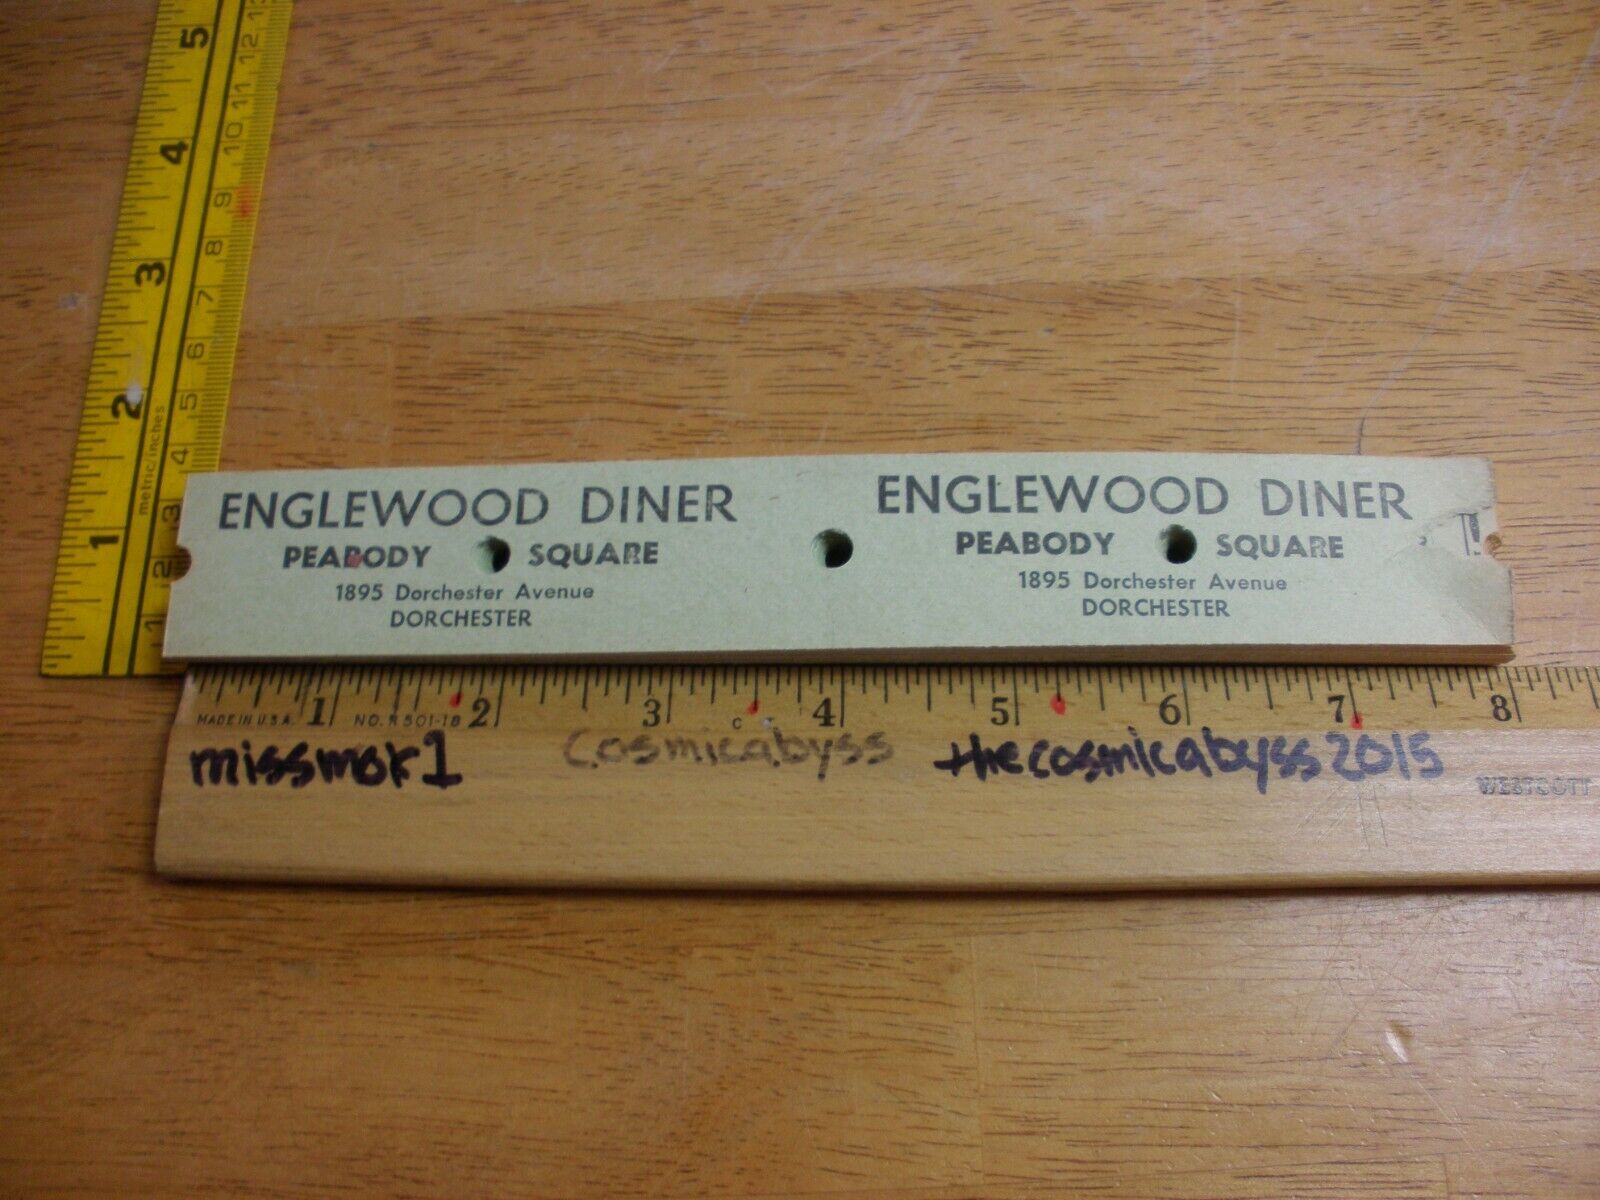 Englewood Diner Peabody Square Dorchester menu tickets approx 60 unused 1940s